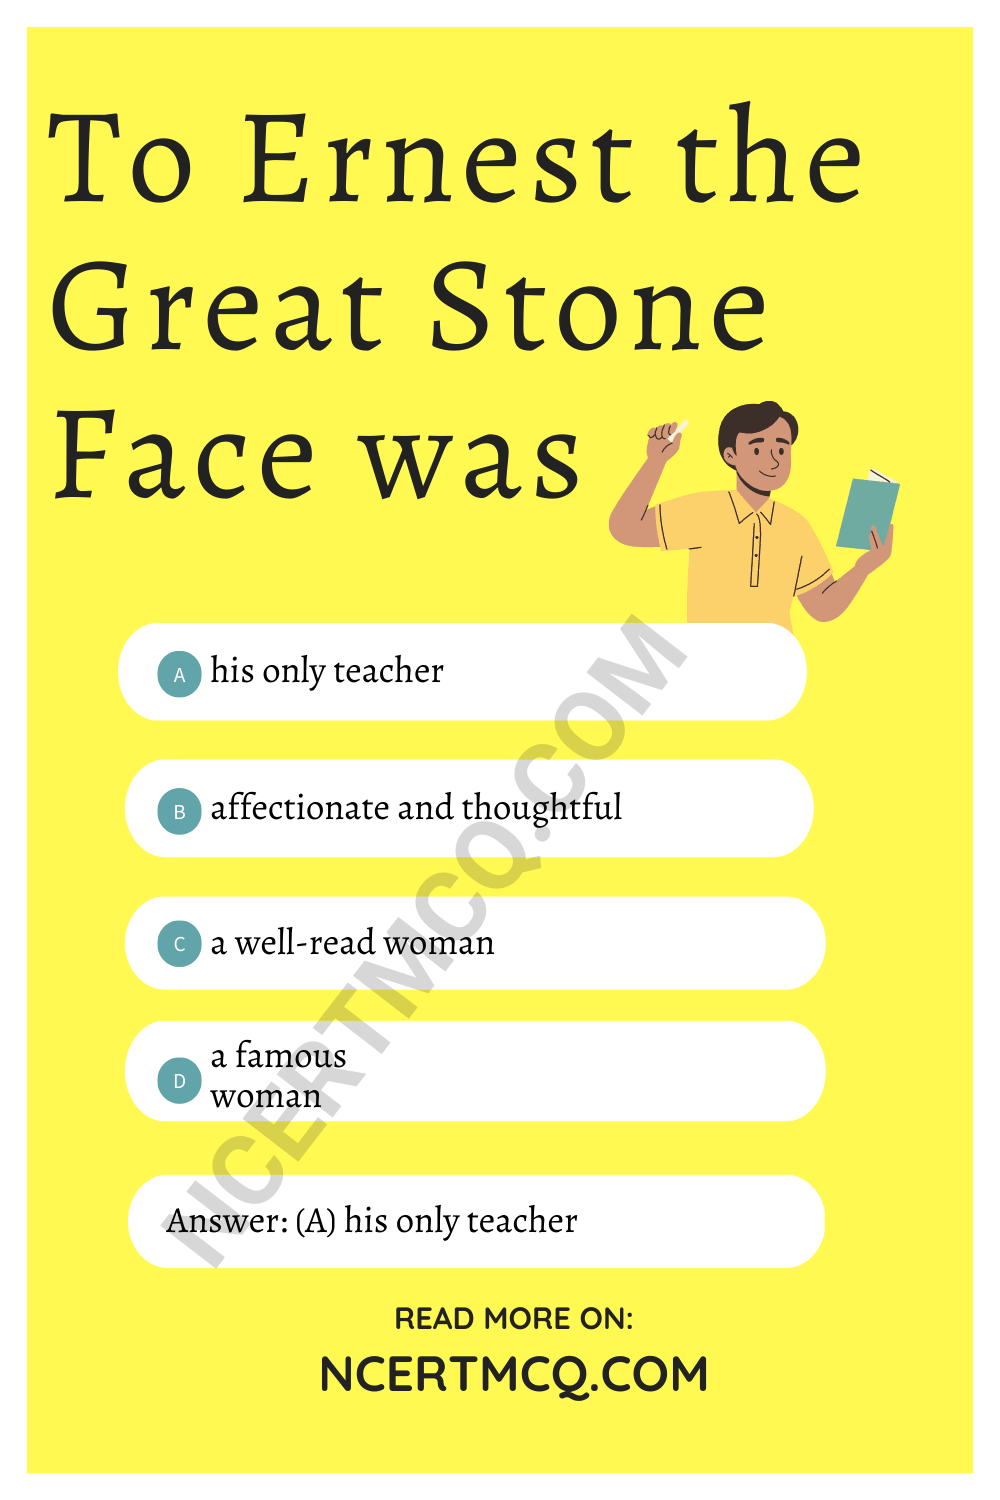 To Ernest the Great Stone Face was